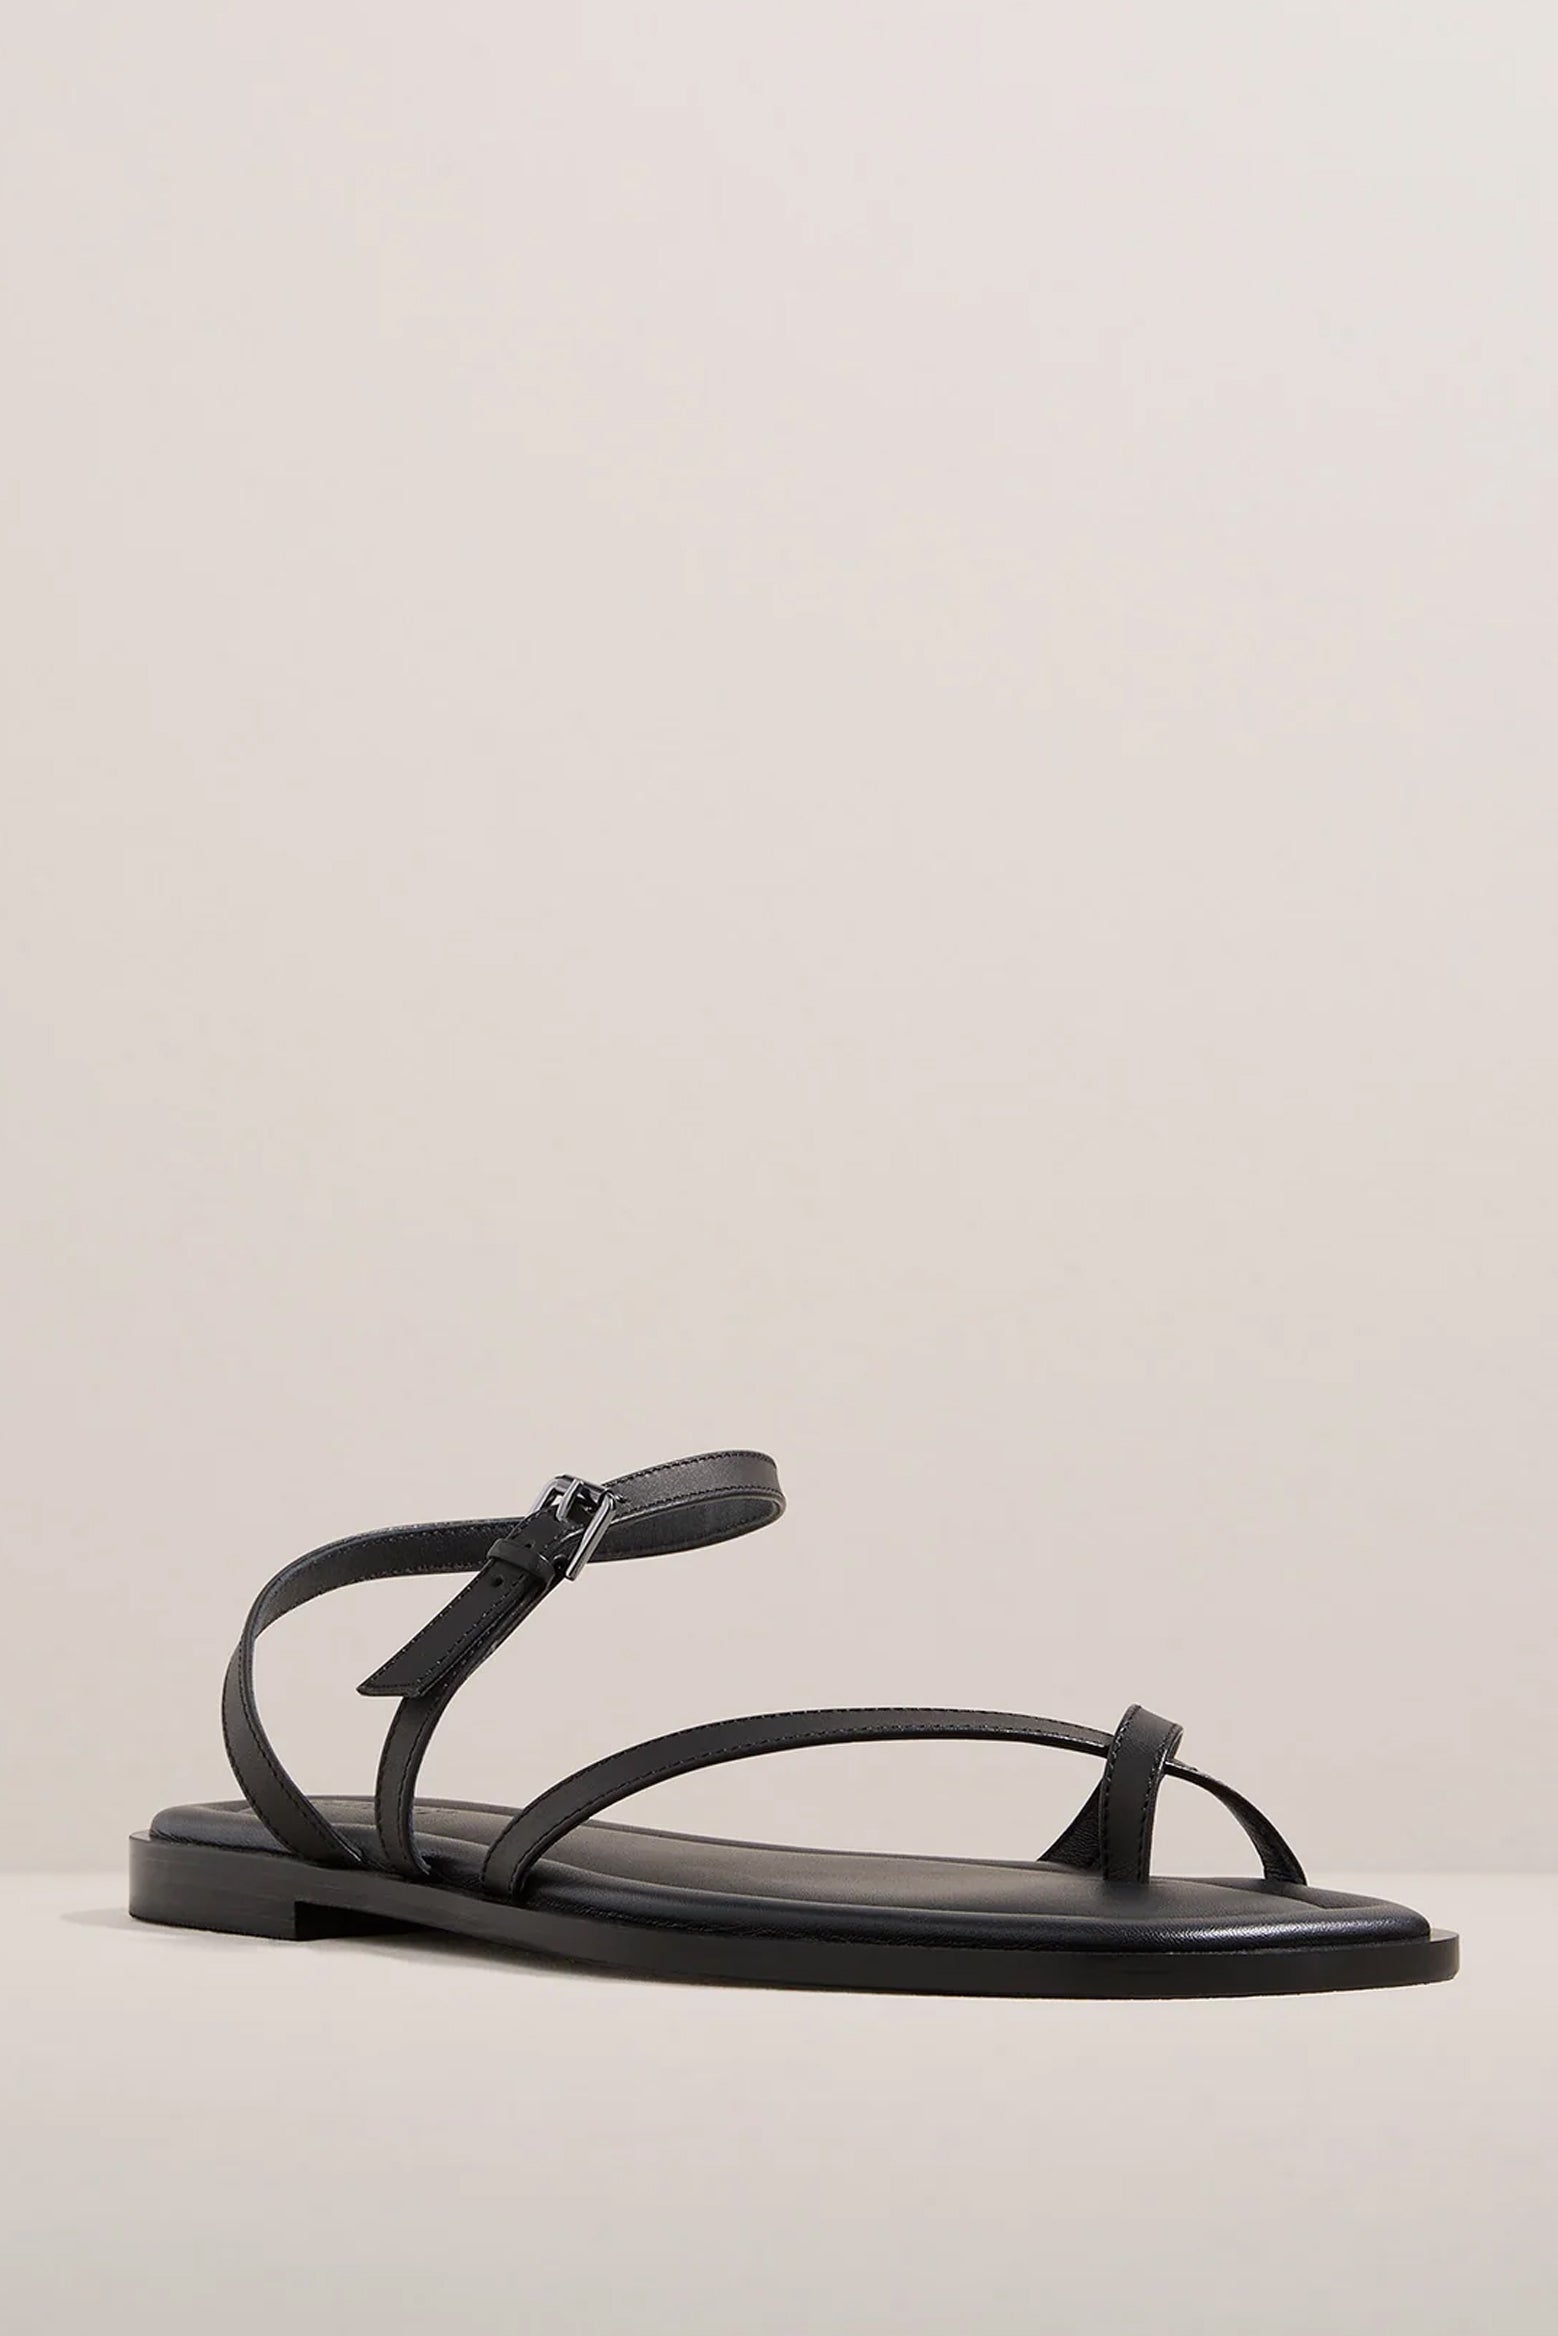 A.Emery Lucia Sandal in Black available at The New Trend Australia.